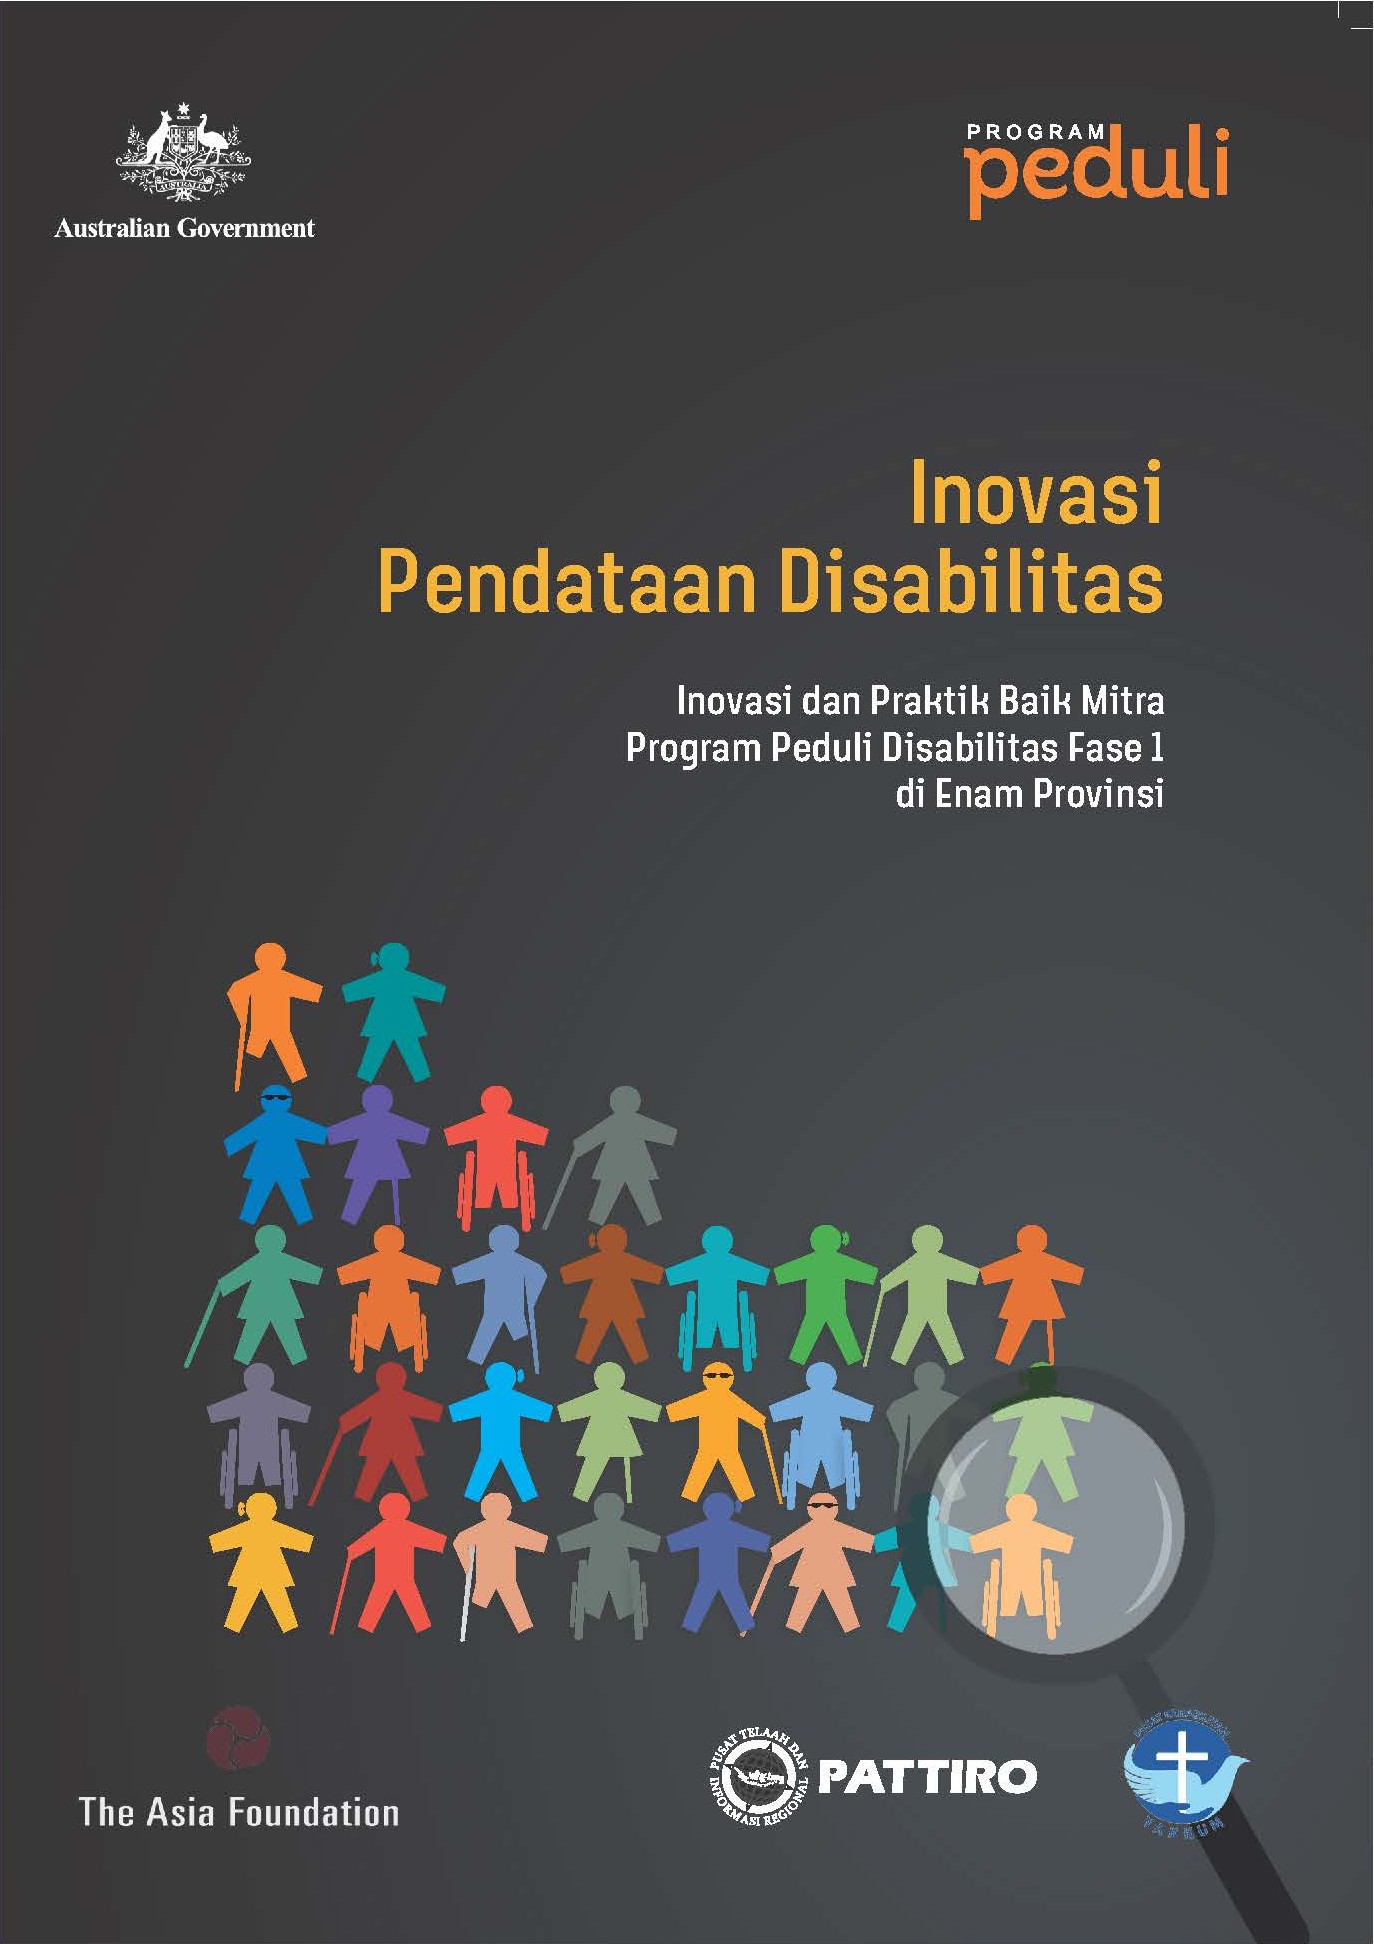 Disability Database Innovation (Review and Good Practices of Peduli Disabilitas Program Partners Phase 1 in Six Provinces)